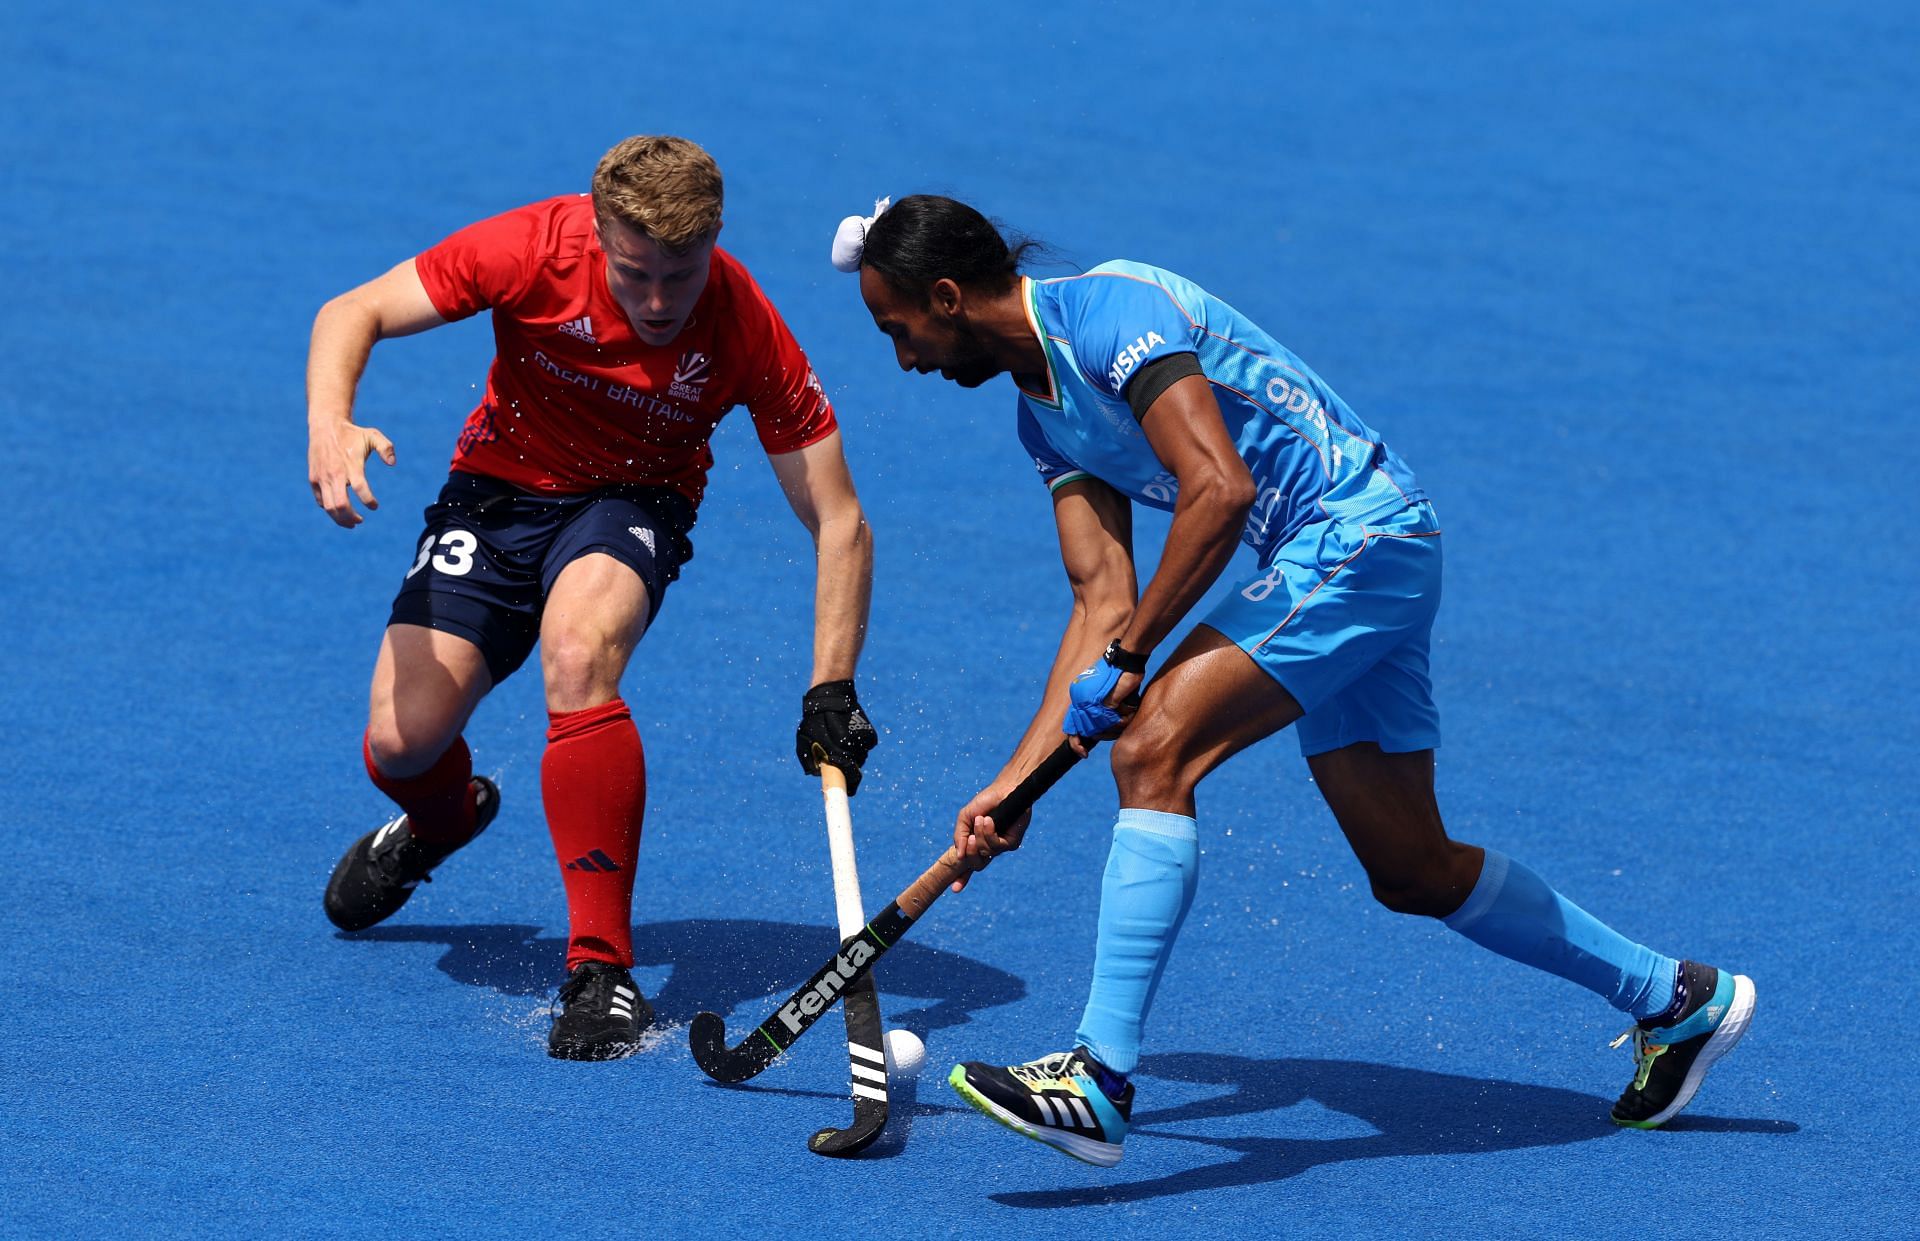 Asian Games 2023 hockey schedule: Know fixtures and match times in India